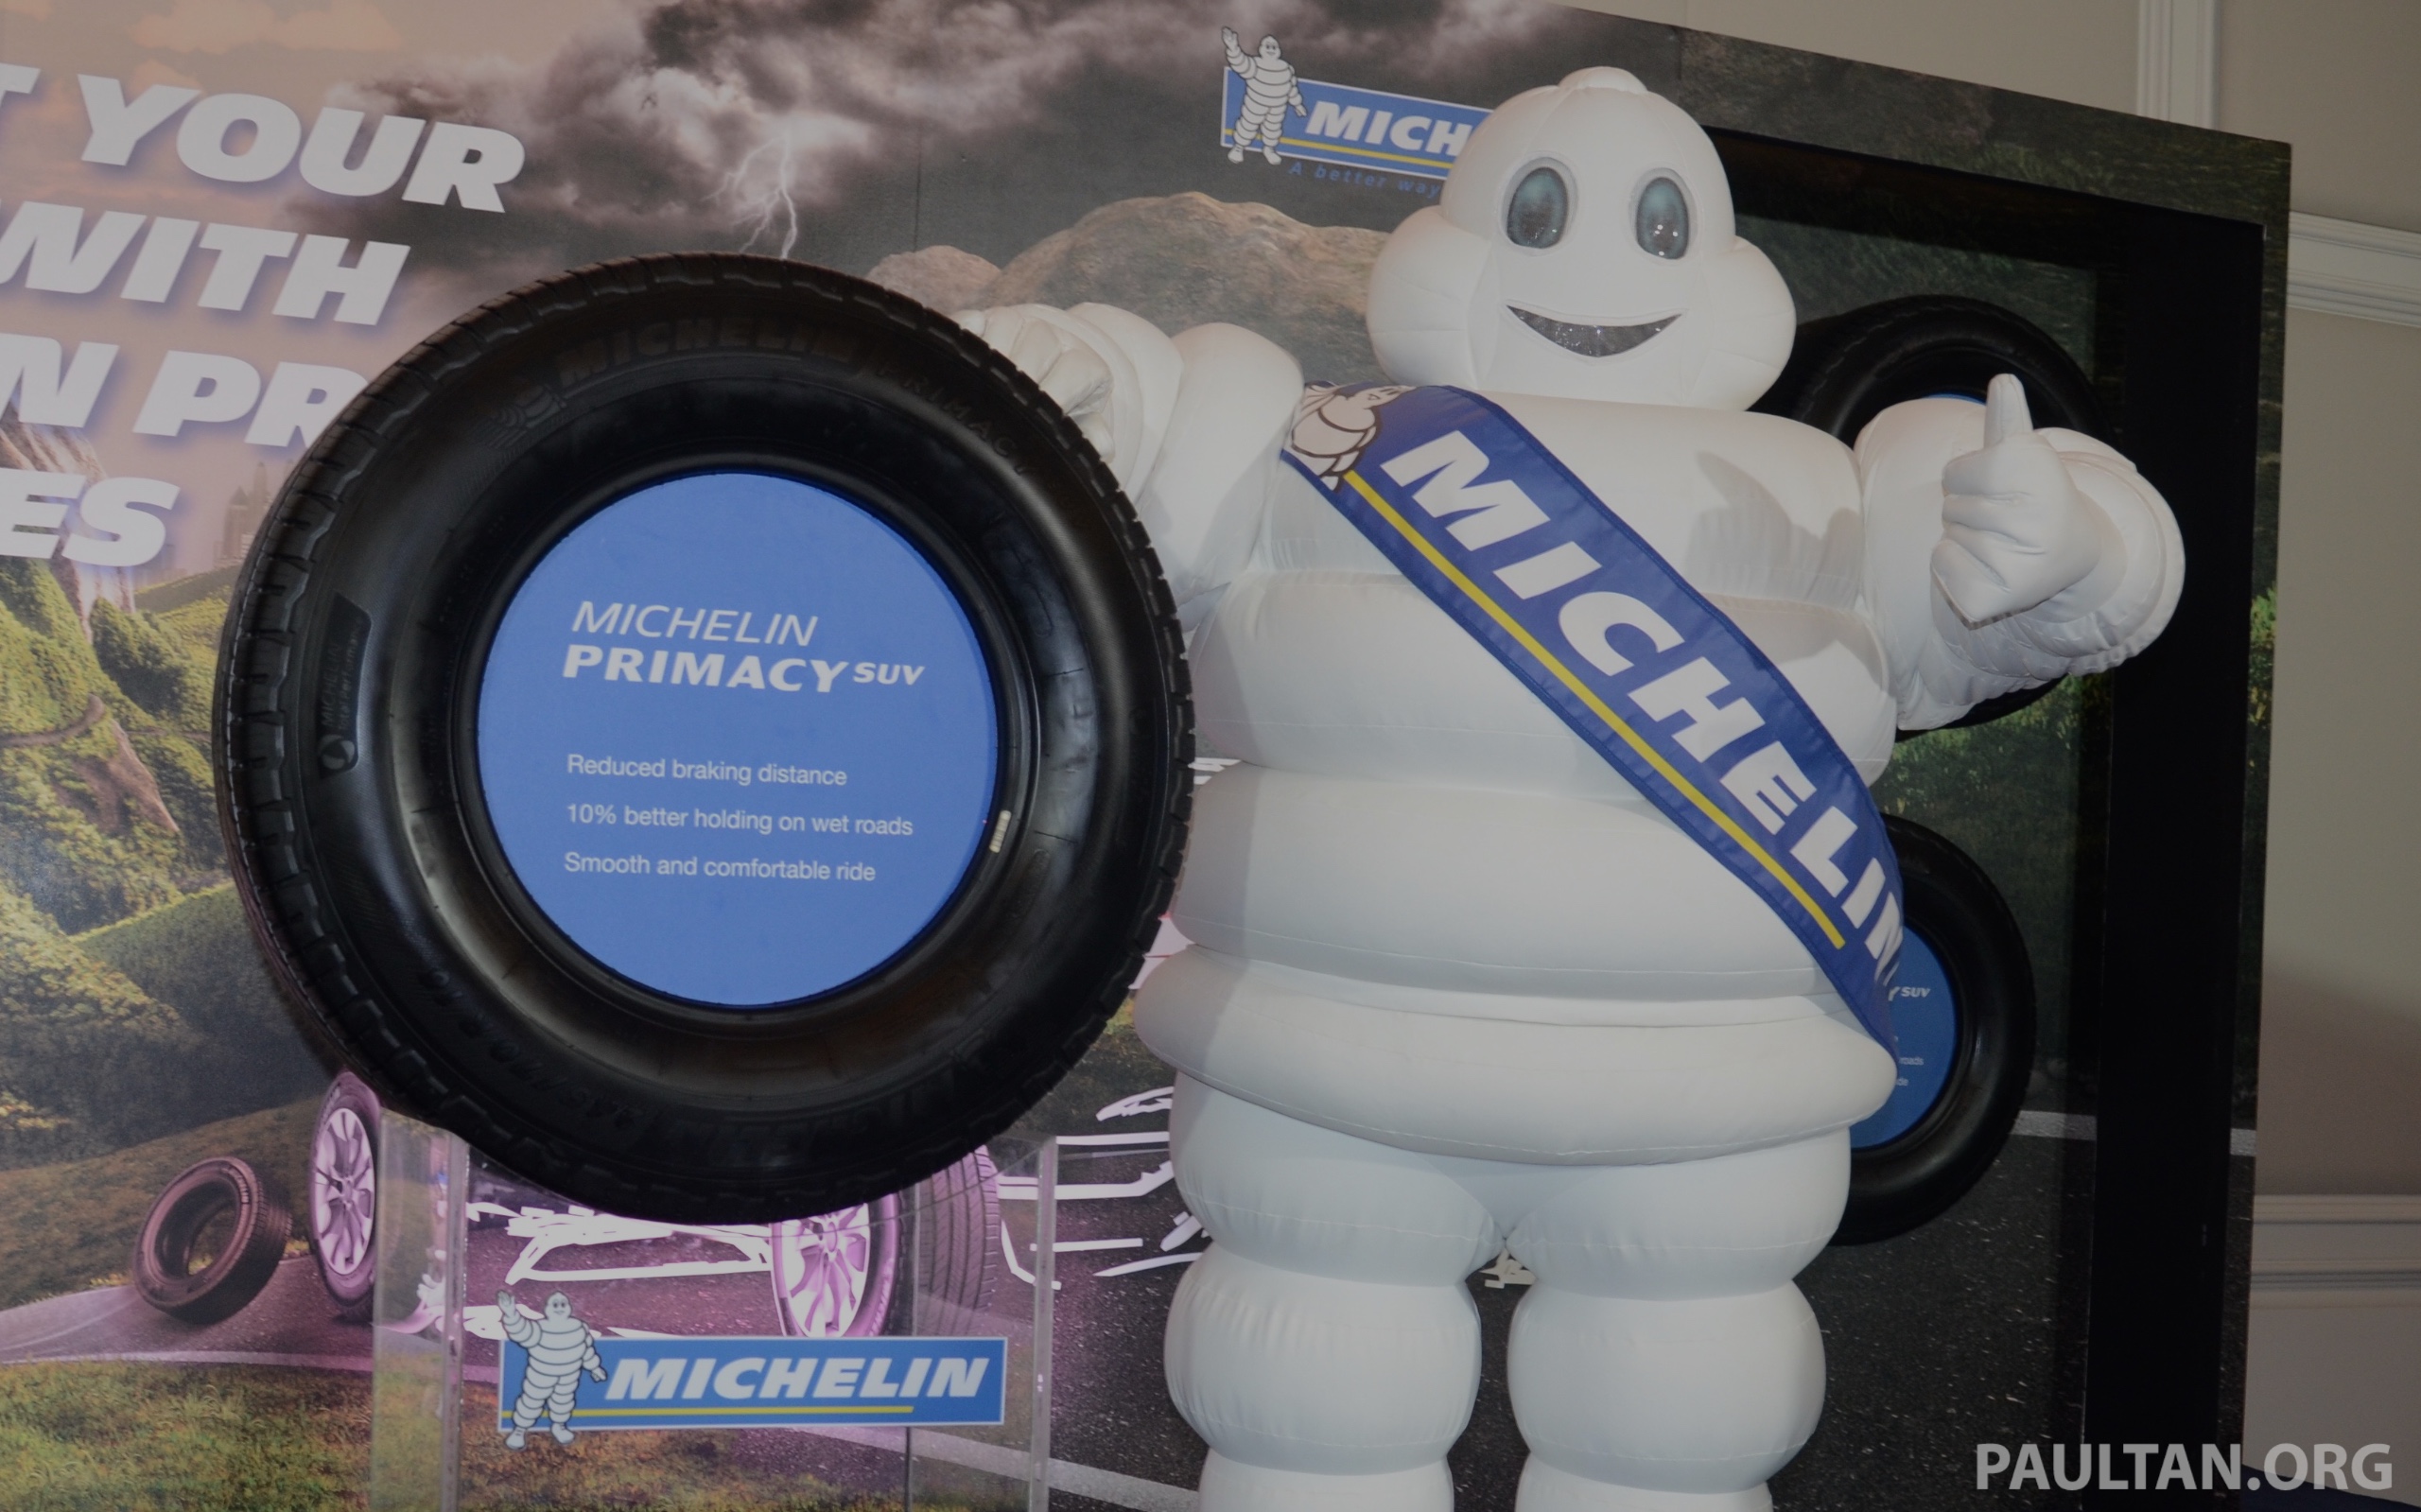 Michelin Most Valuable Tire Brand